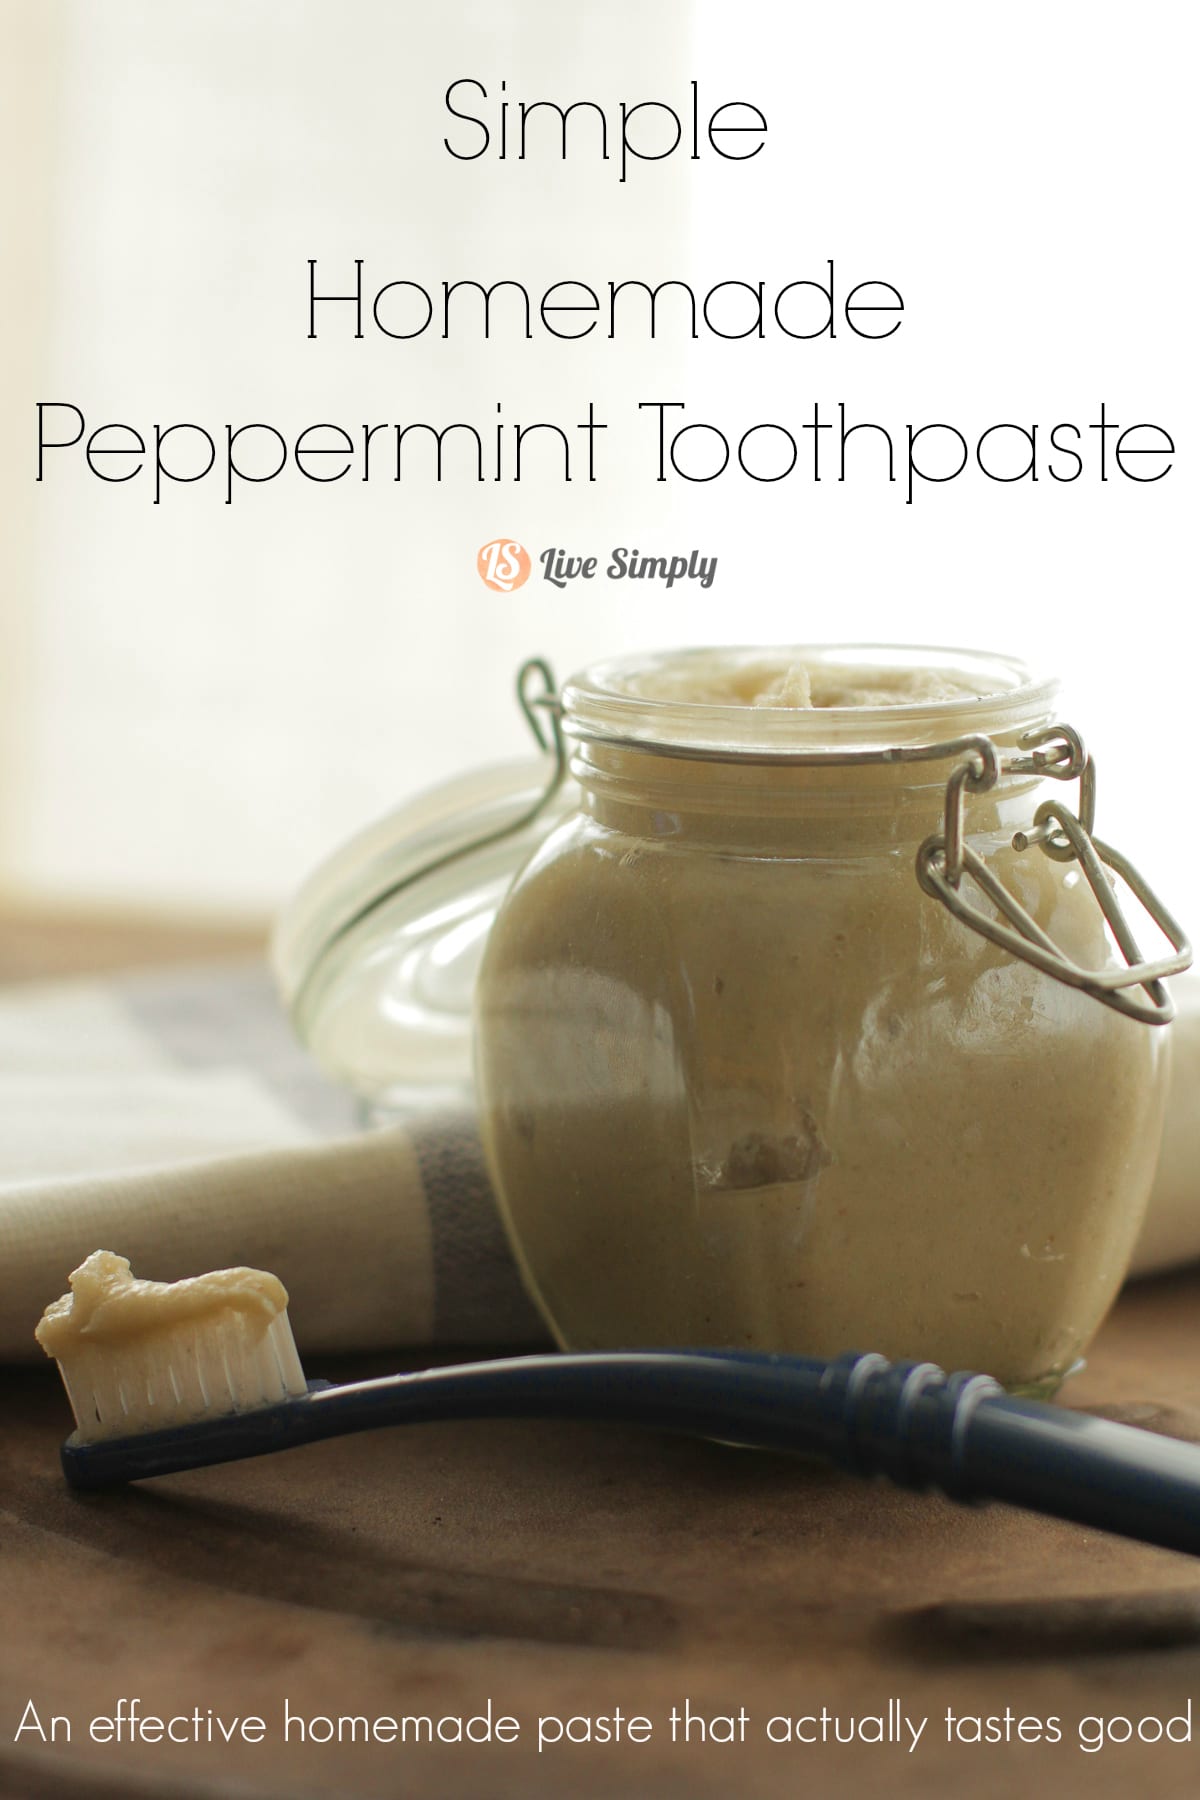 Simple Homemade Peppermint Toothpaste